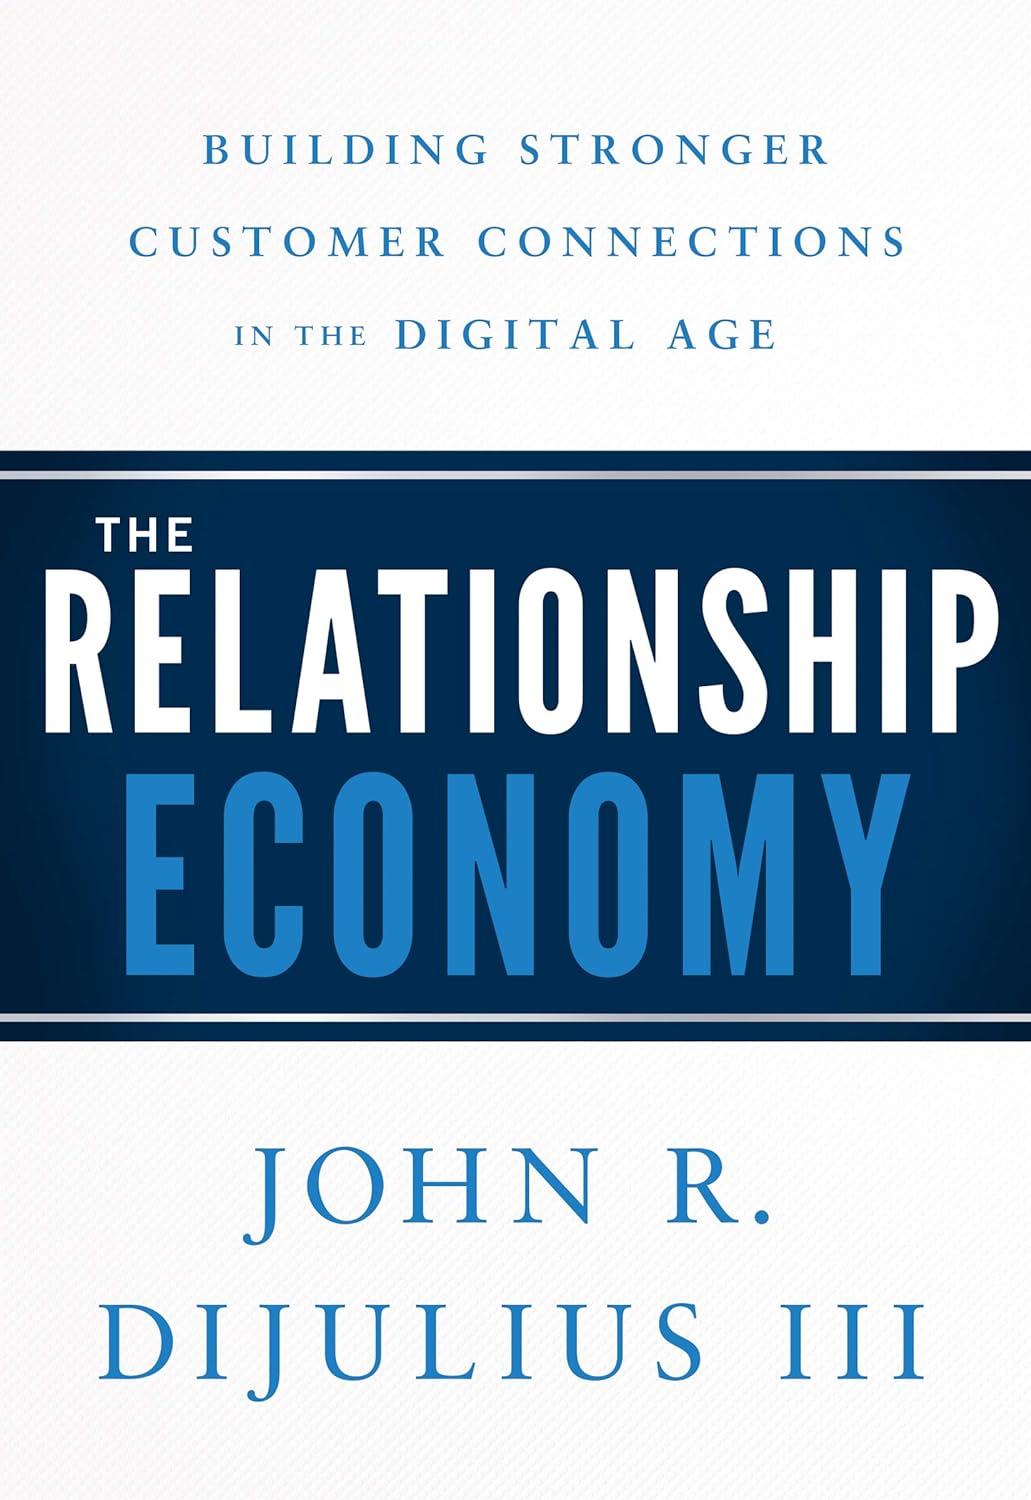 John R. Diljulius III - The Relationship Economy. Building Stronger Customer Connections in the Digital Age